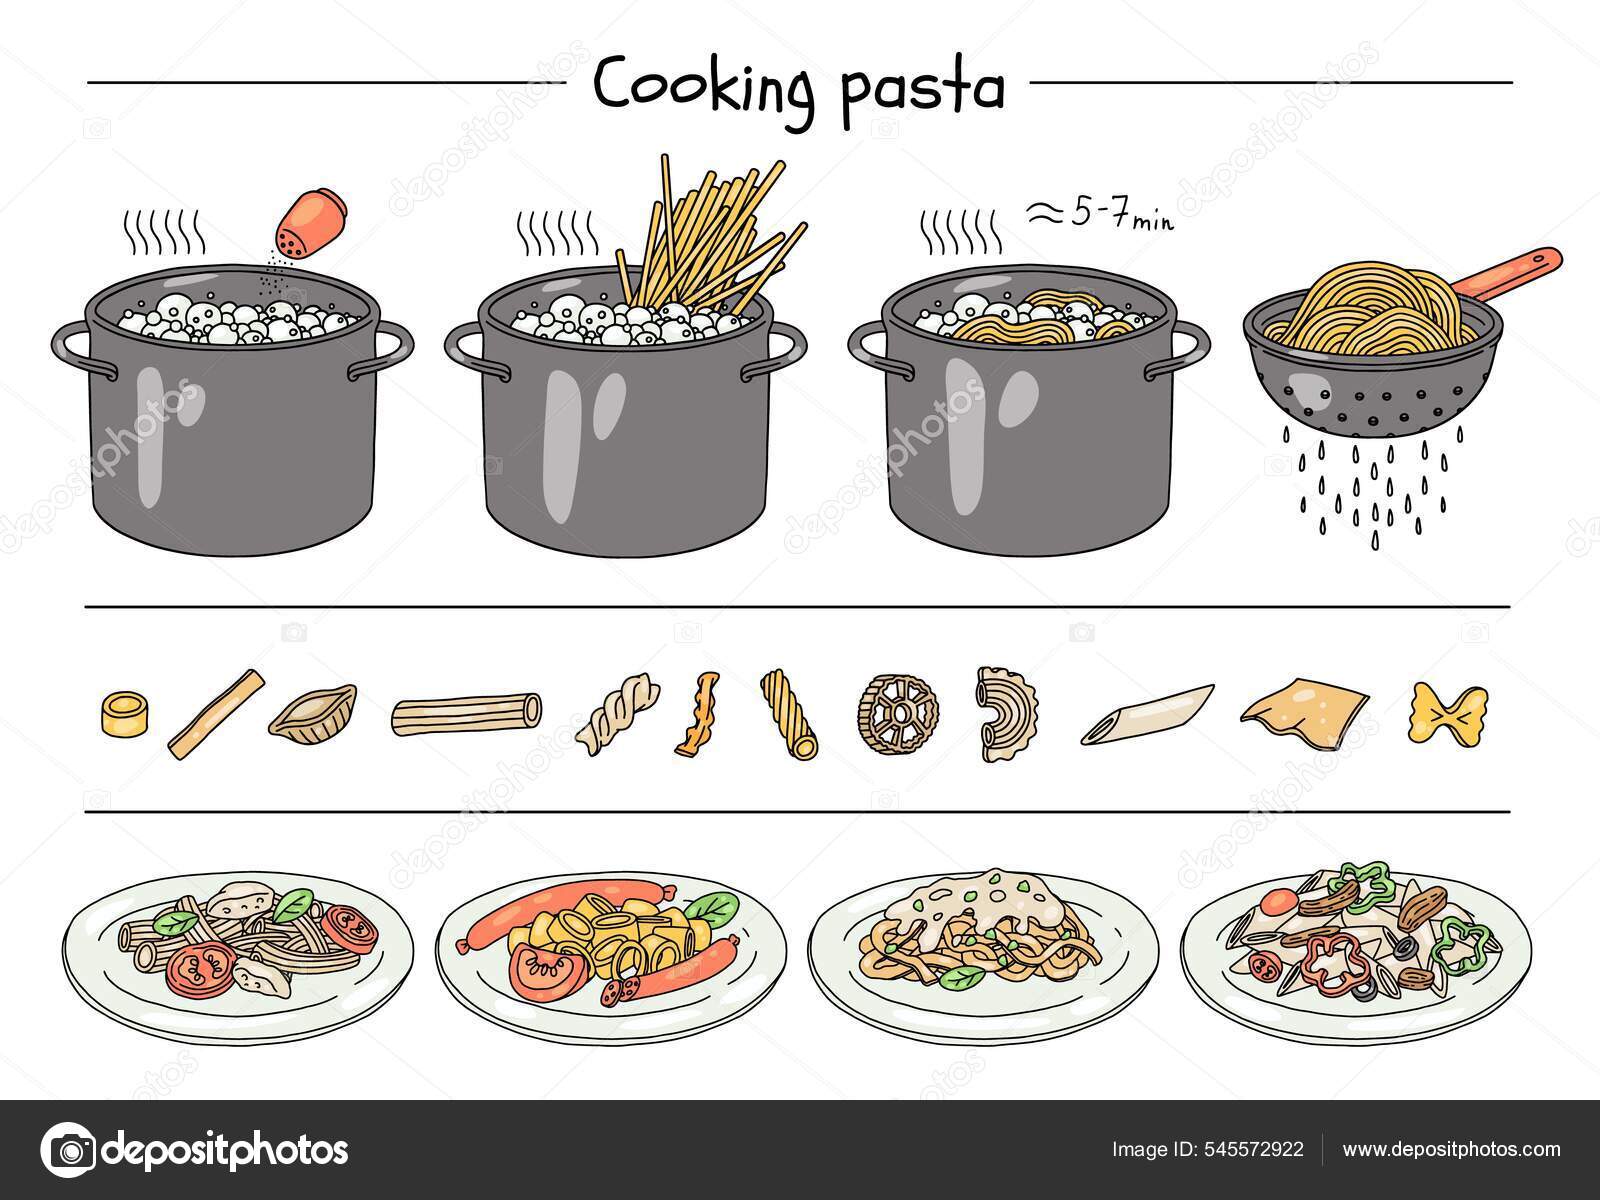 A Step-by-Step Guide to Making Delicious Pasta at Home